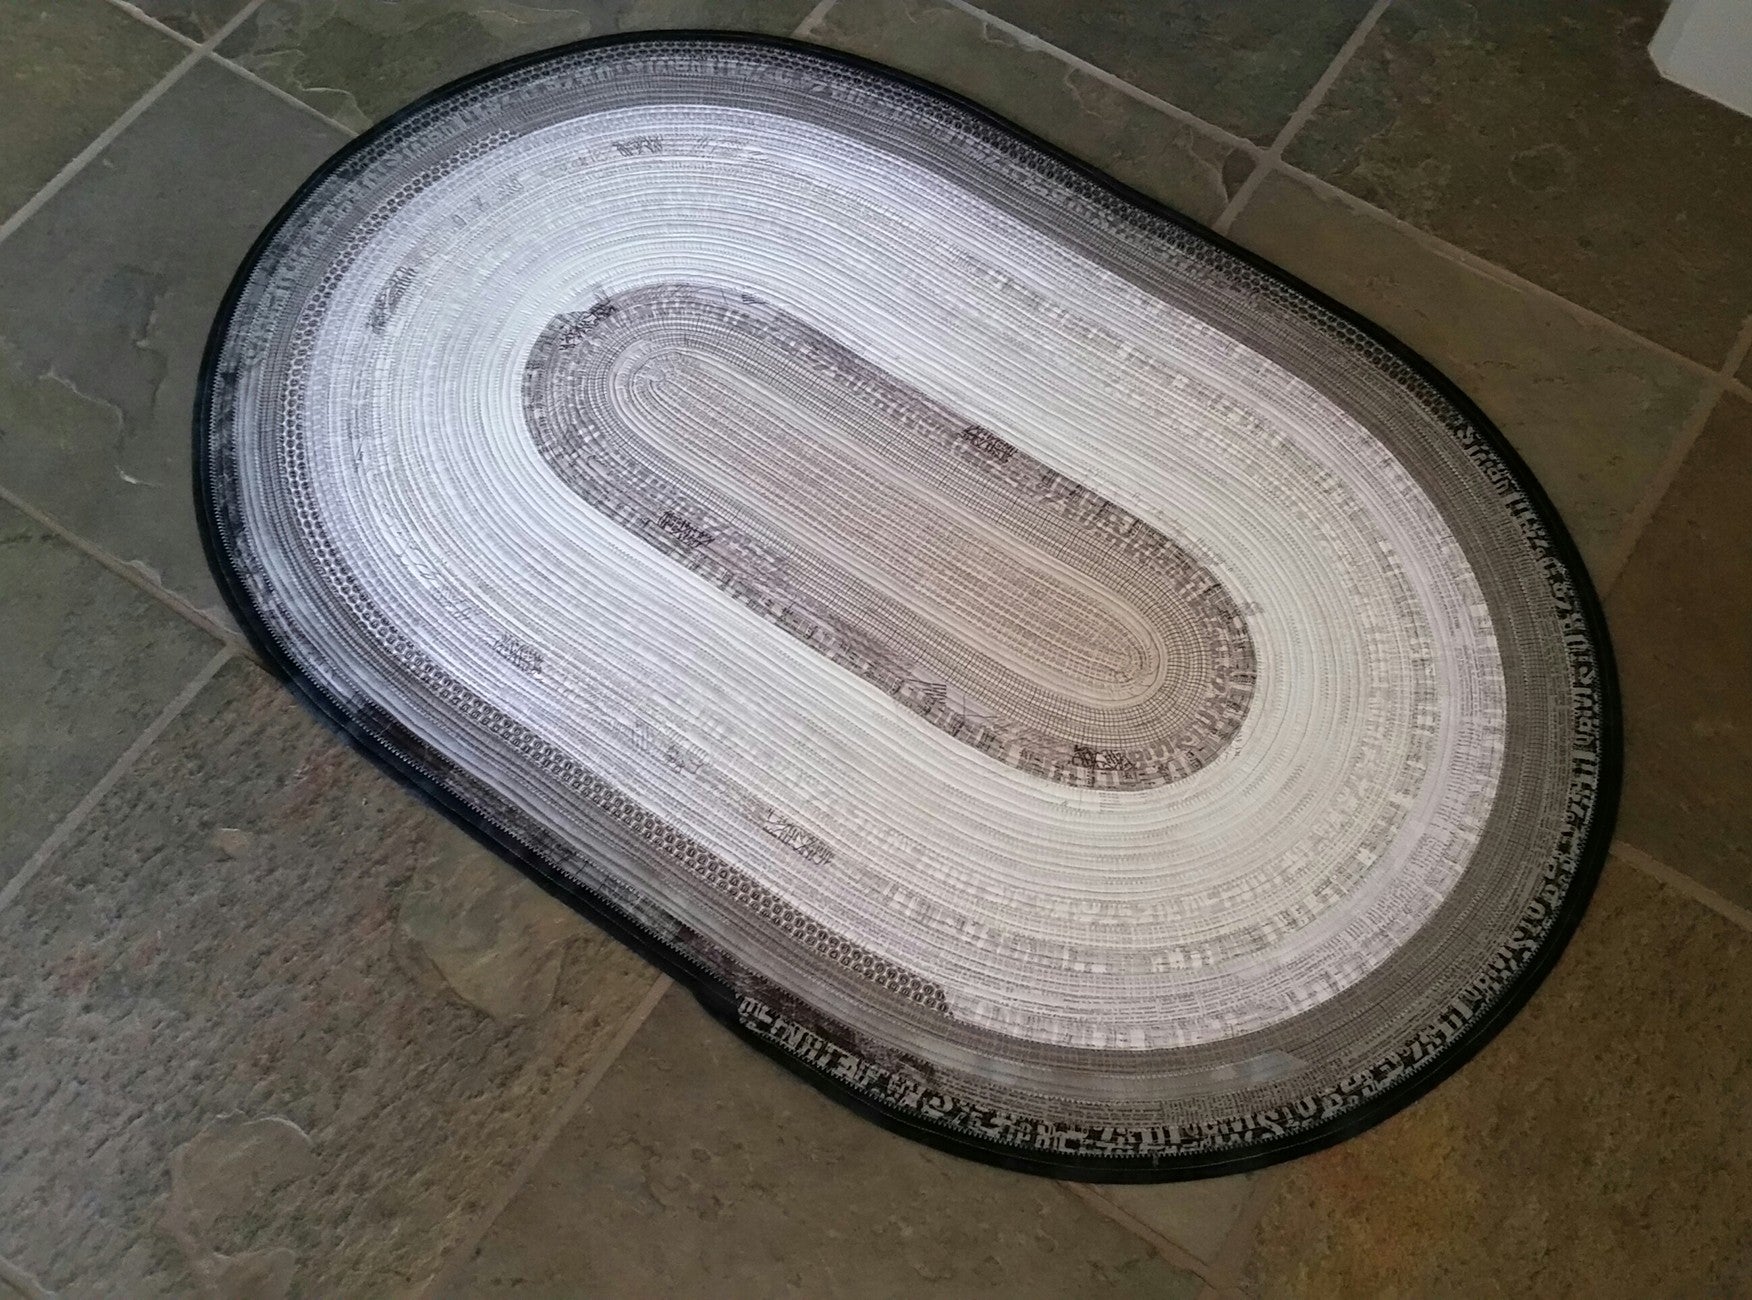 Jelly-Roll Rug by Roma Lambson of RJ Designs